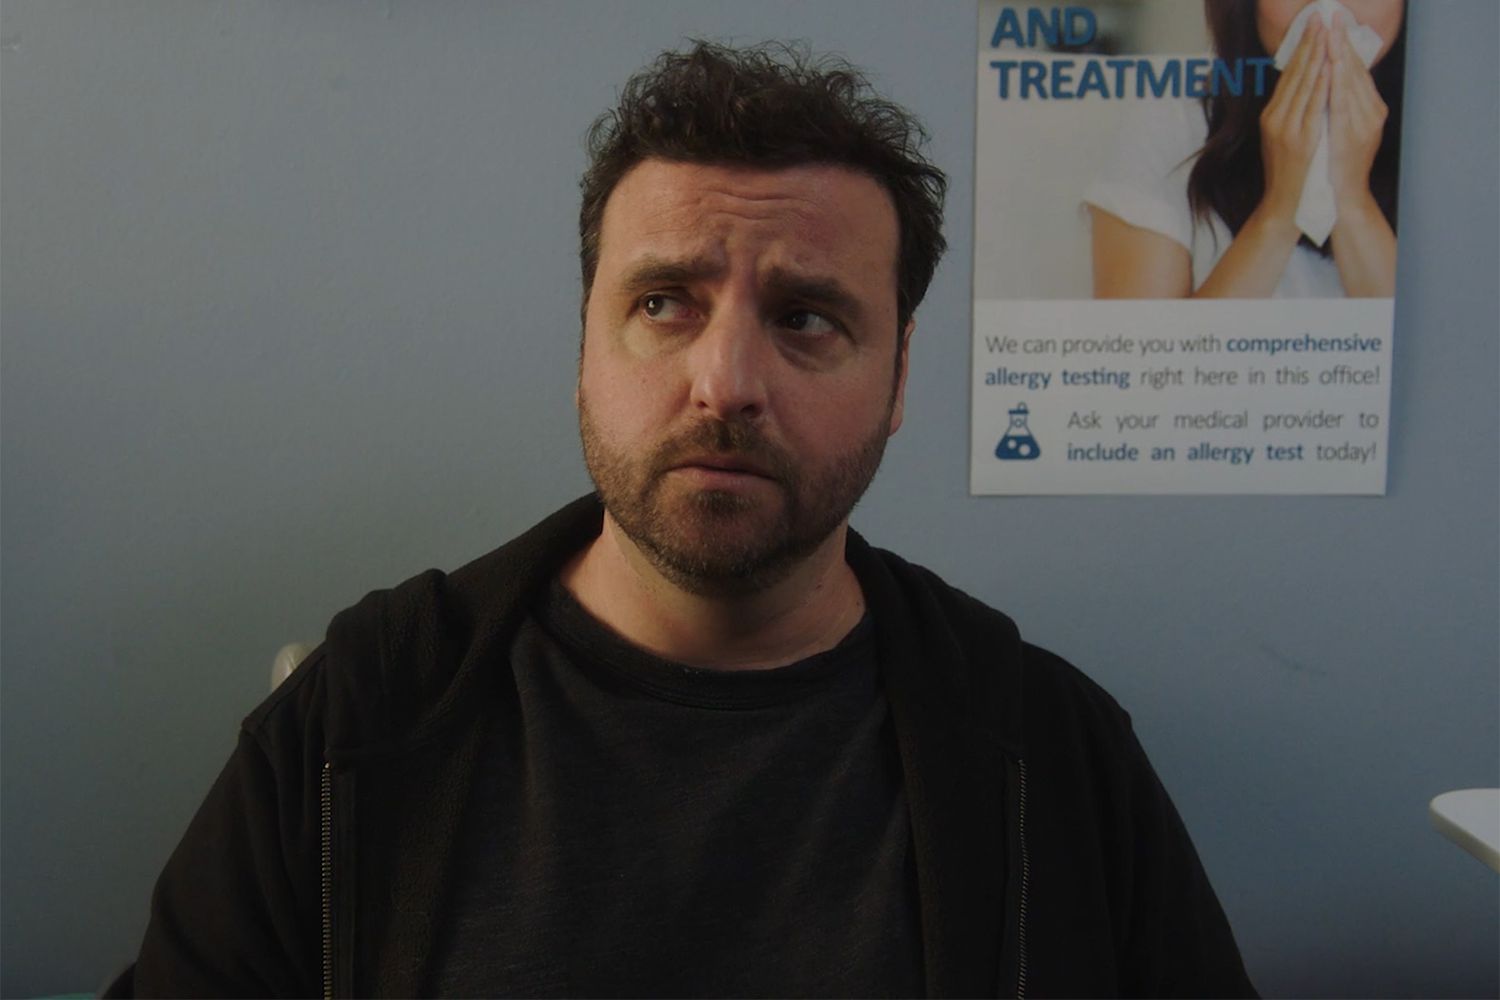 David Krumholtz in LOUSY CARTER, a Magnolia Pictures release. 